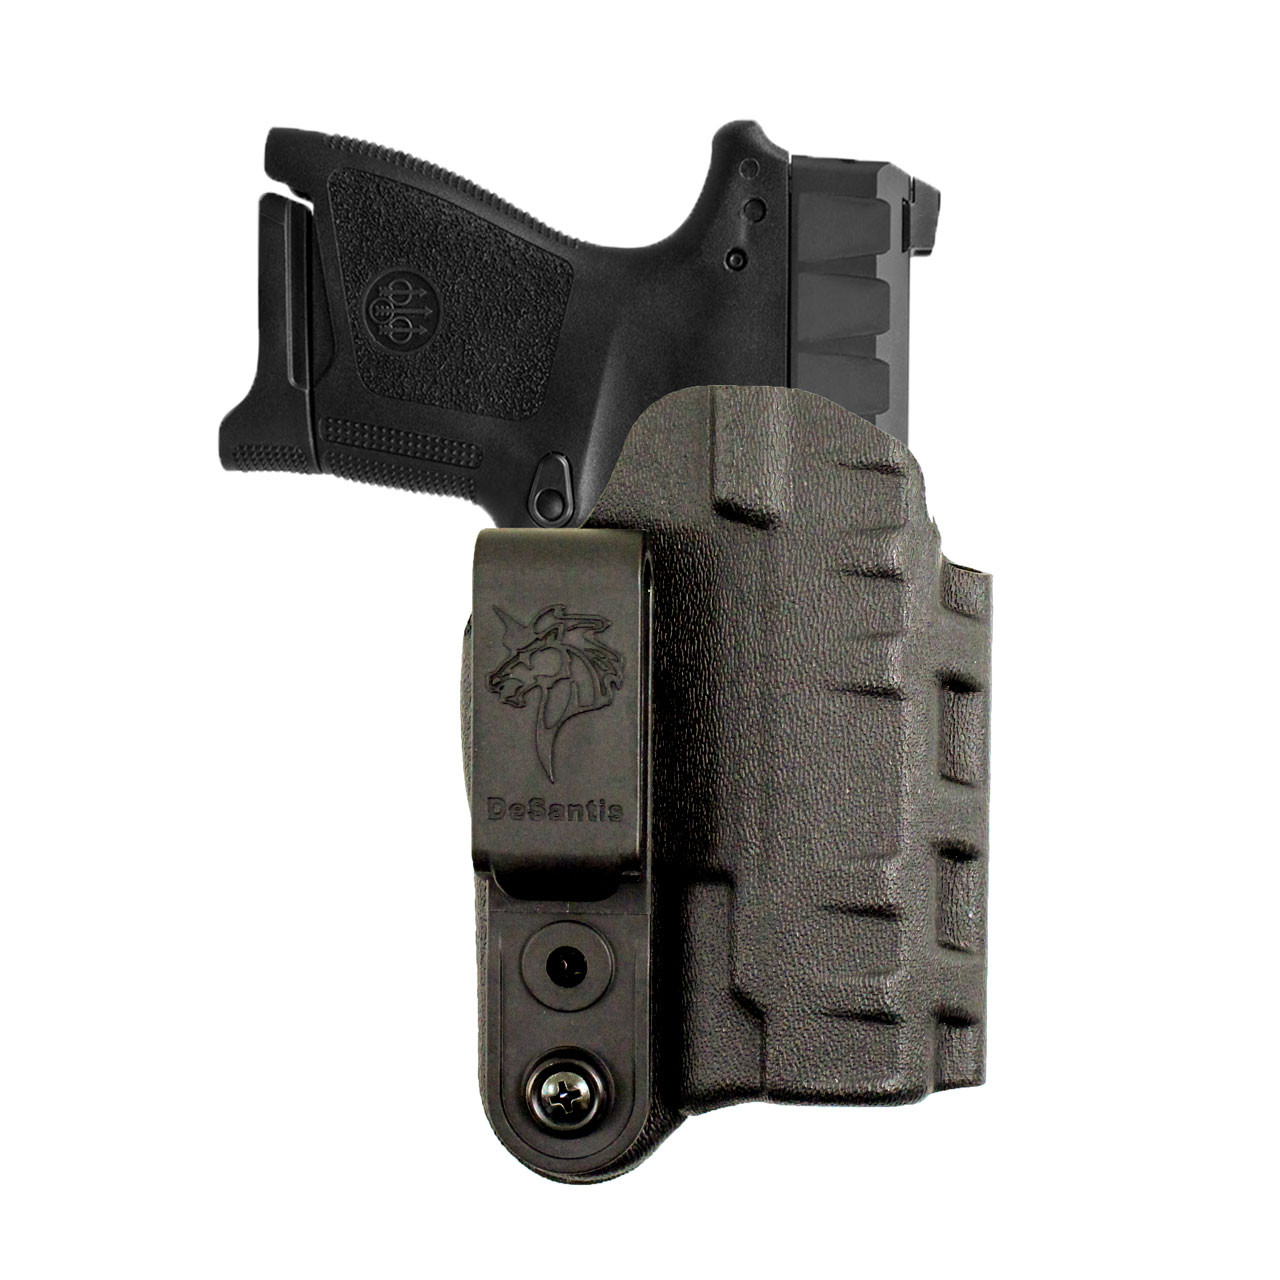  Compatible with Glock 43 G43x, Inside Waistband Carry Holster  Compatible with G43 G43x Pistol, 9mm Gun Holster for Men/Women Adj. Cant &  Retention, Polymer Fiber-Reinforced & Kydex Handmade Available 